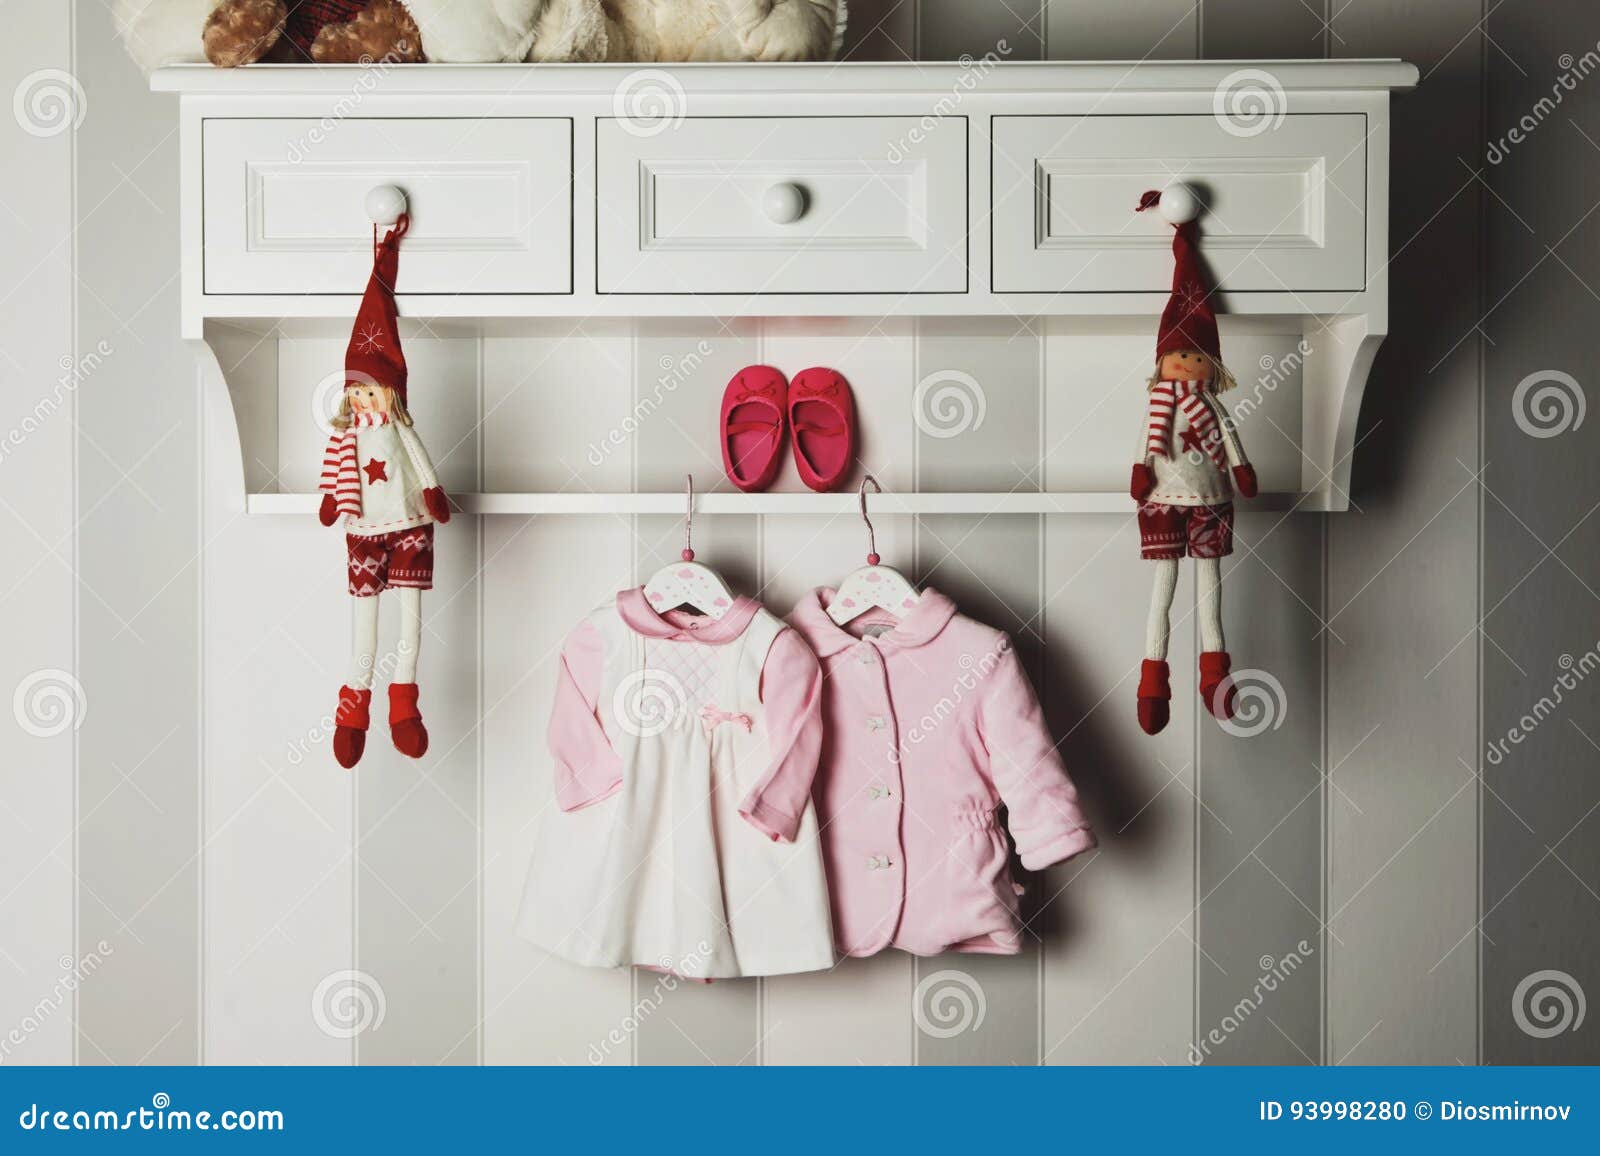 Baby Clothes Concept Of Child Fashion Flat Lay Children S